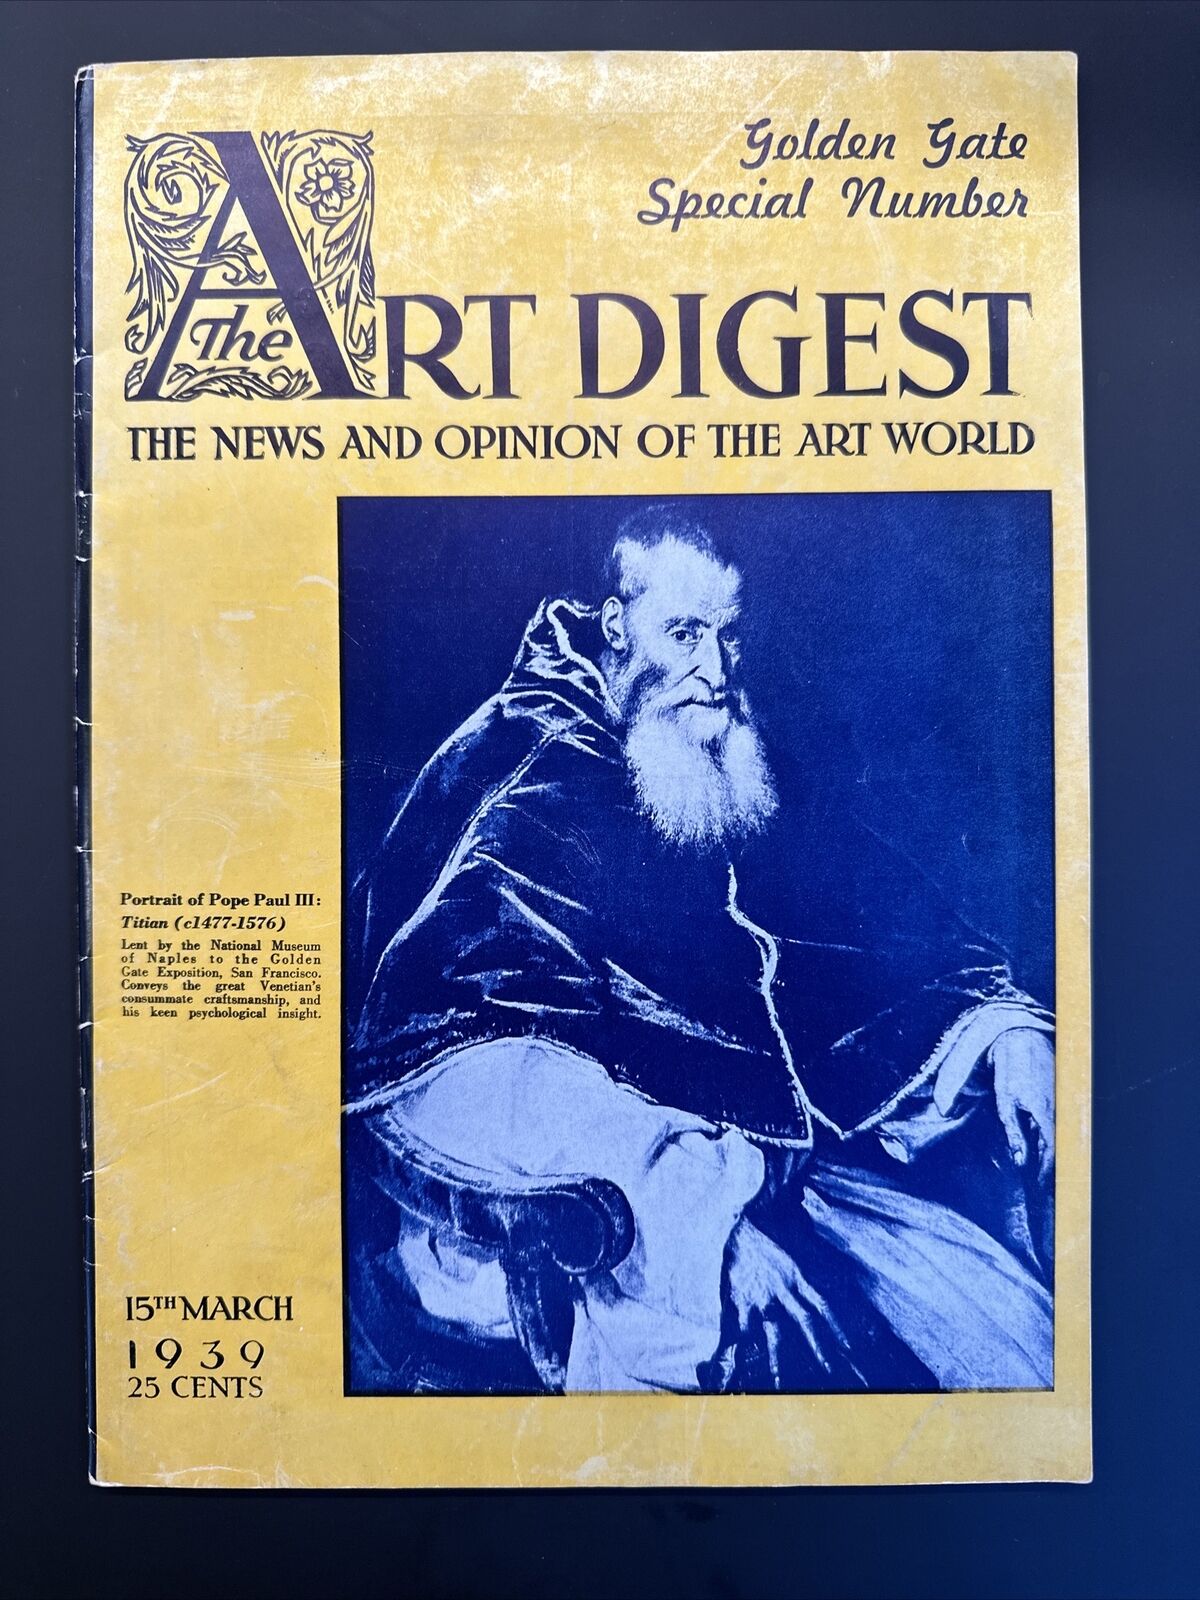 The Art Digest 15th March 1939 